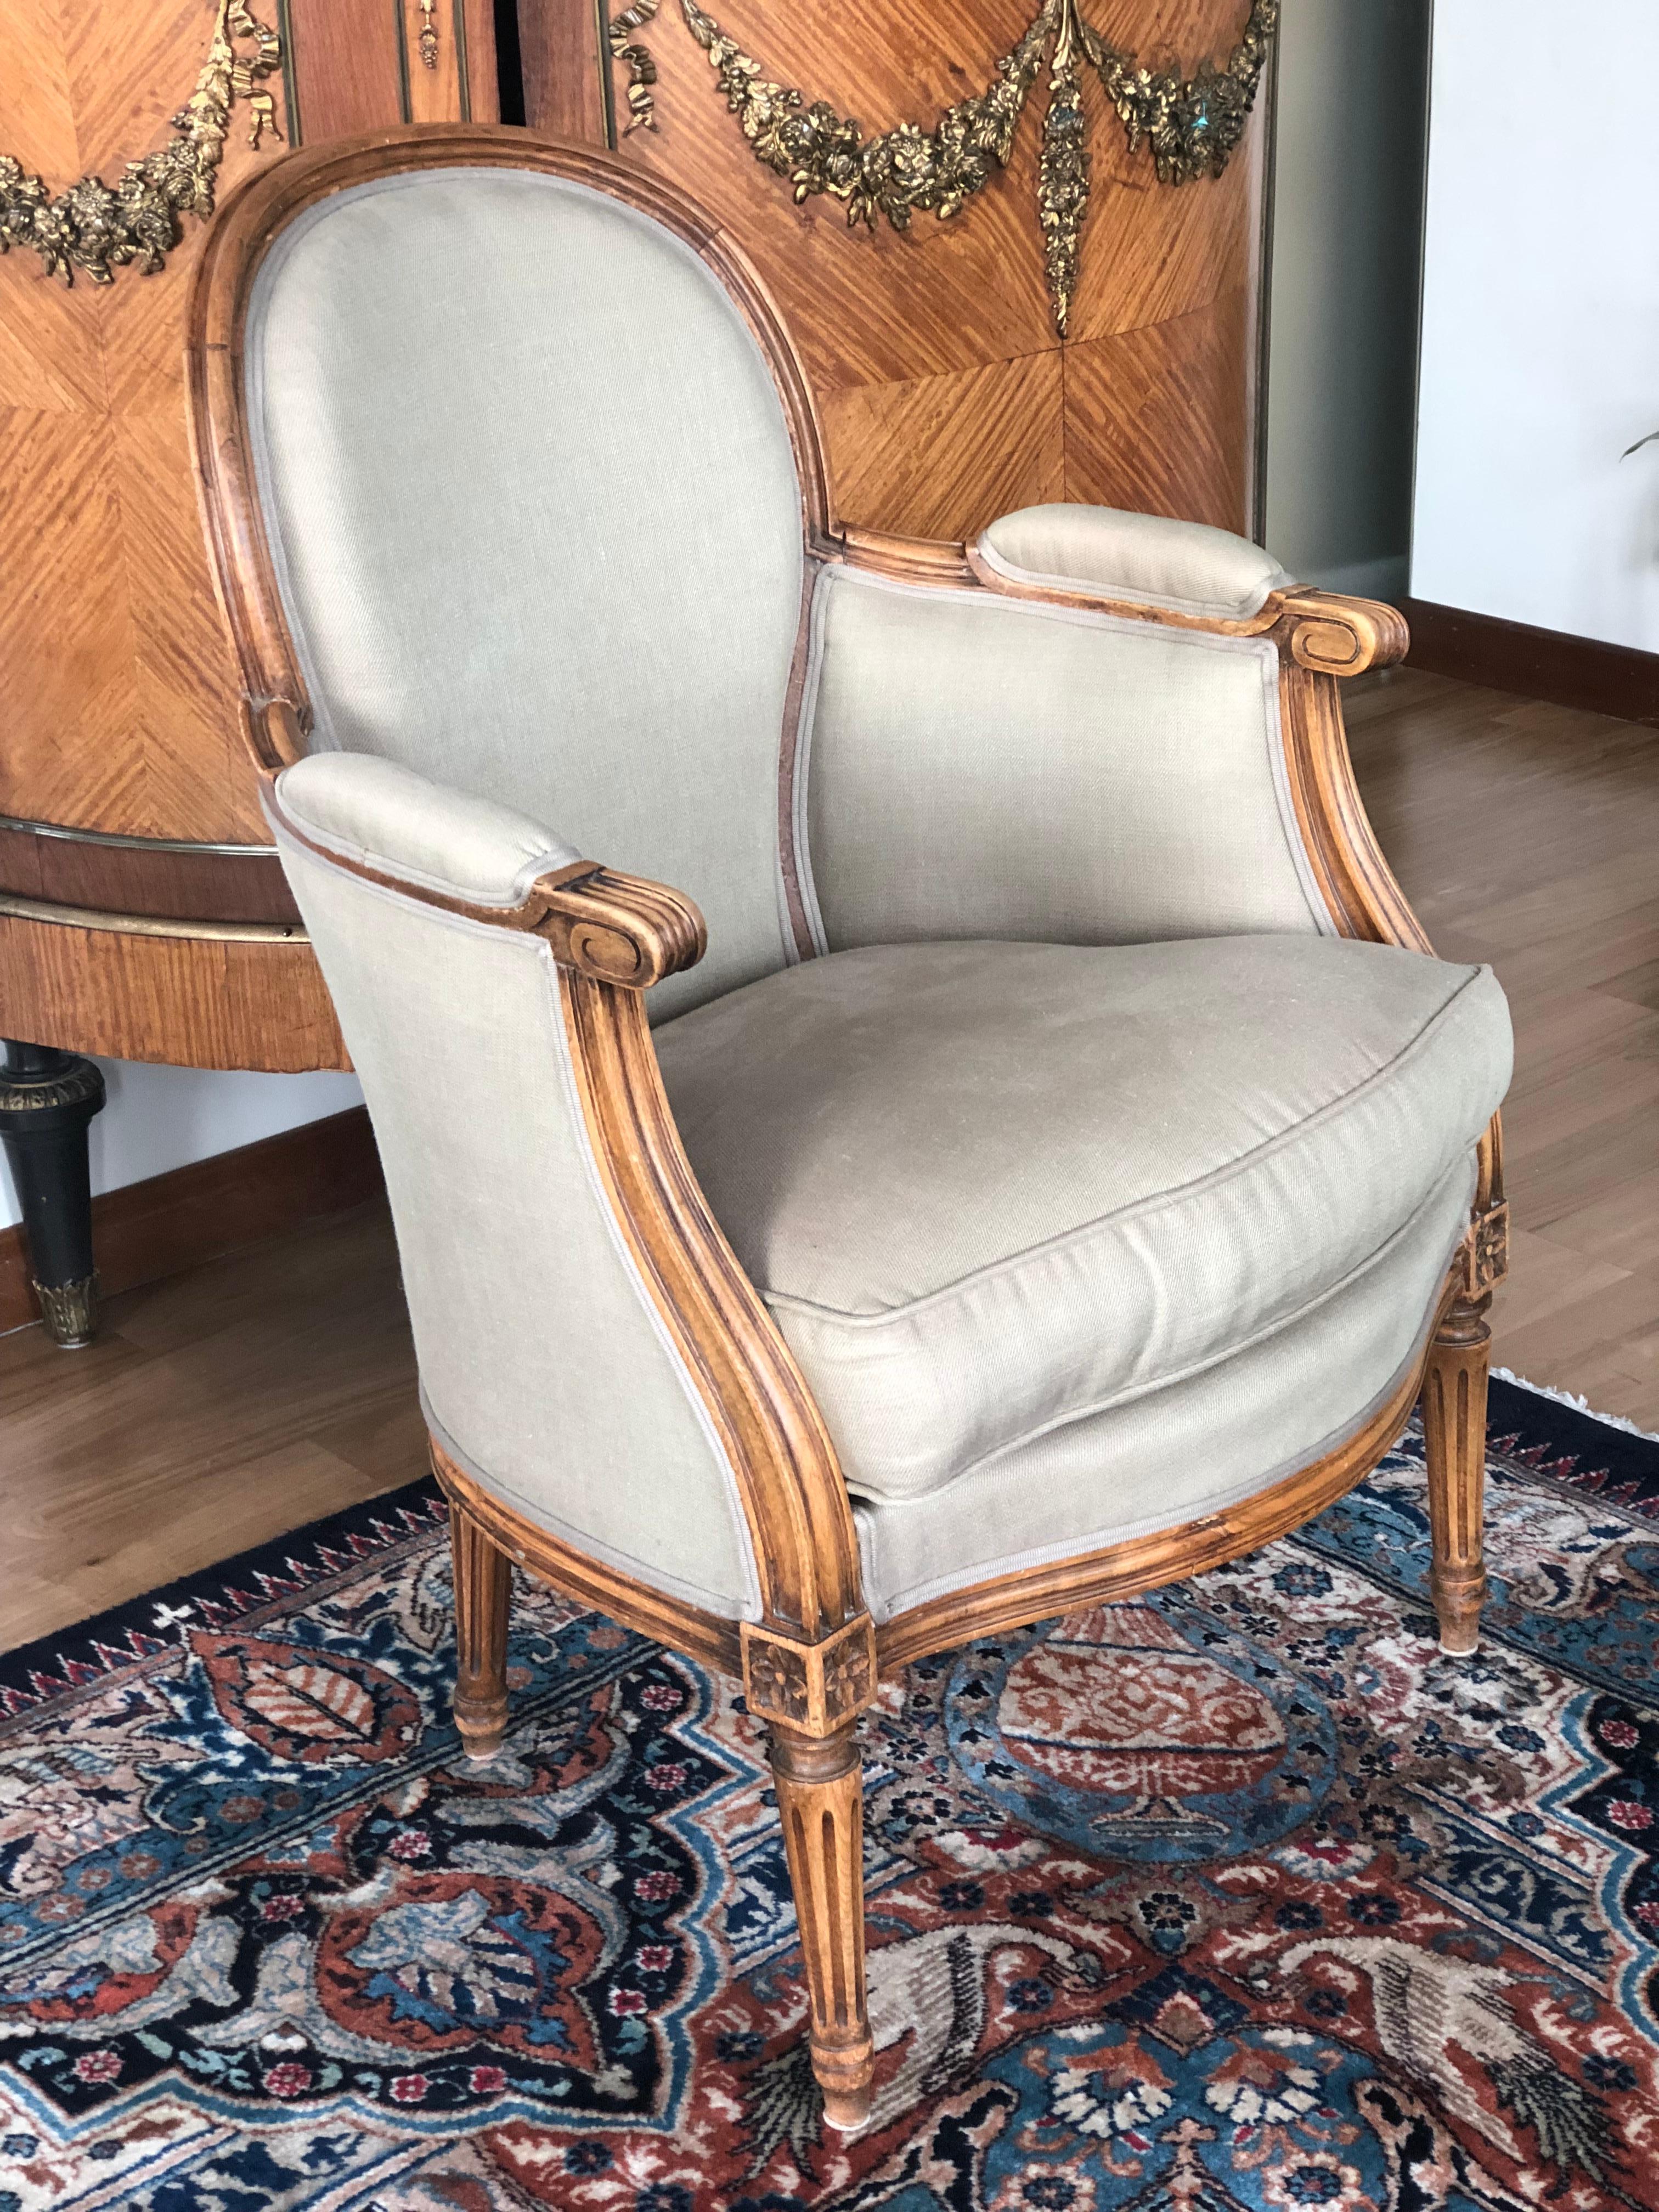 Elegant pair of antique armchairs from France. These chairs are made of solid walnut with curved legs and back and have been reupholstered with a beige linen fabric. Very comfortable and cozy. Perfect condition.
France, circa 1880.